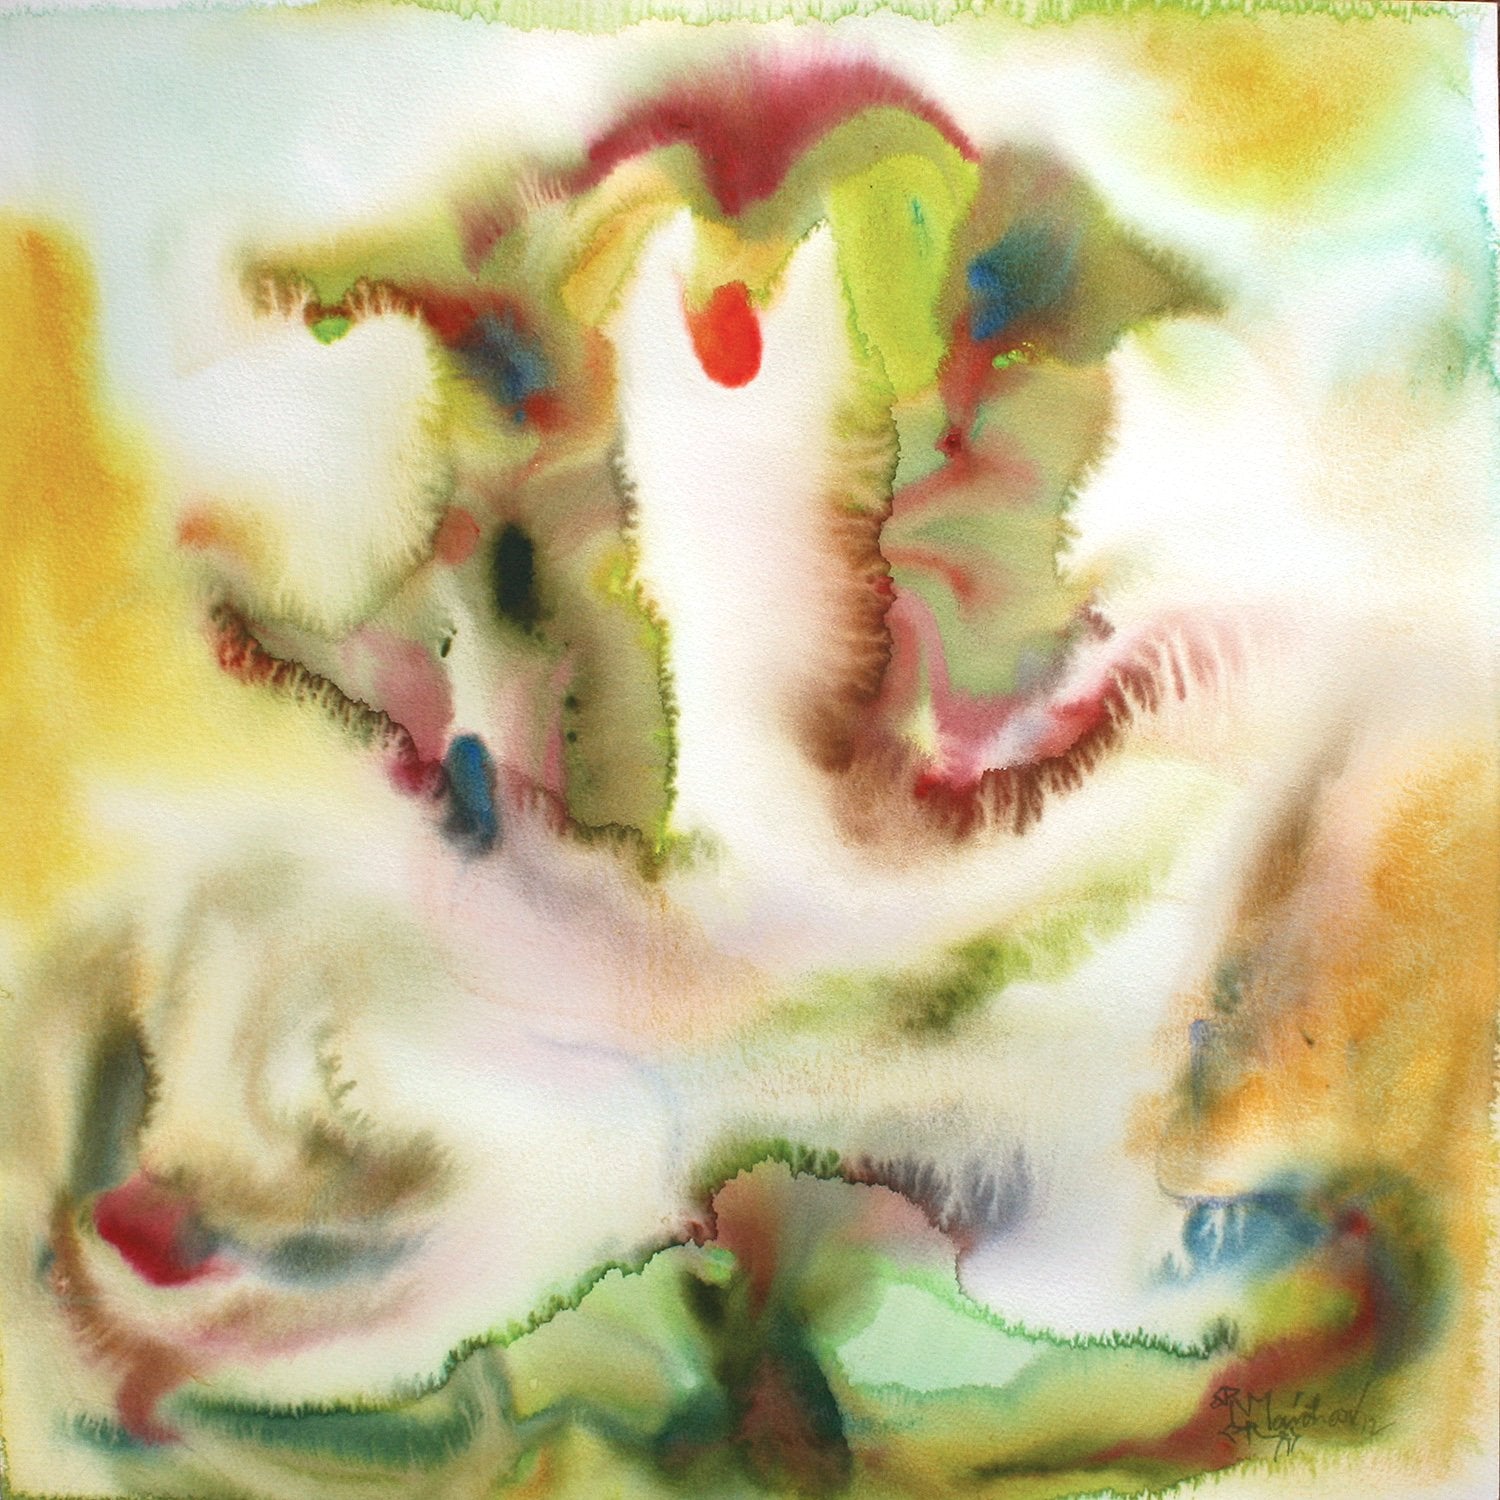 Ganesha 17|N.S. Manohar- Water colour on Board, 2012, 21.5 x 21.5 inches